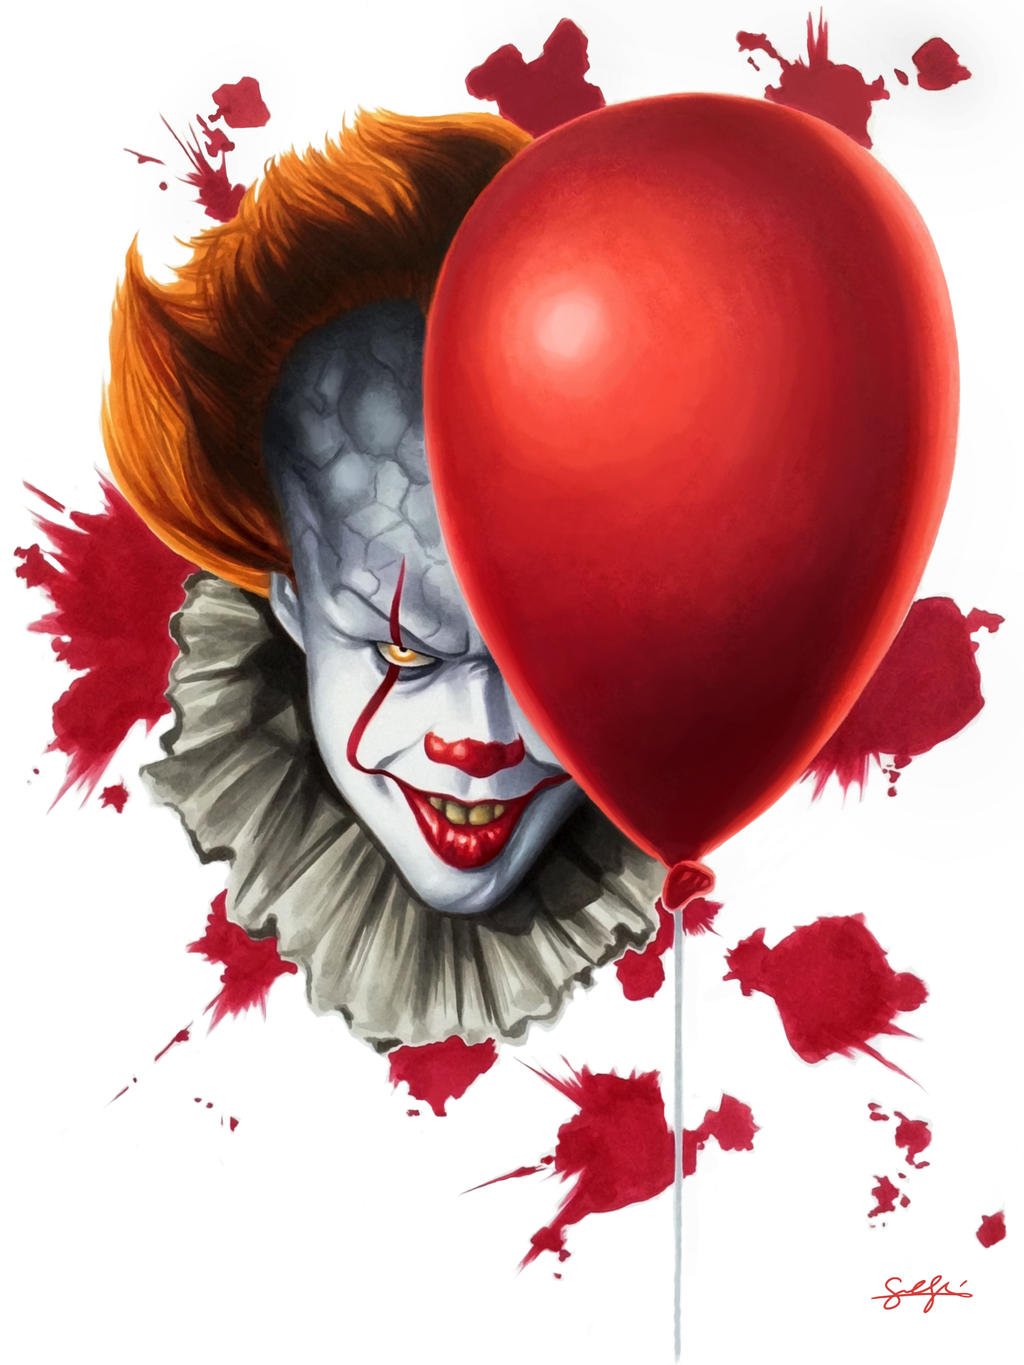 Pennywise 2017 by smlshin on DeviantArt